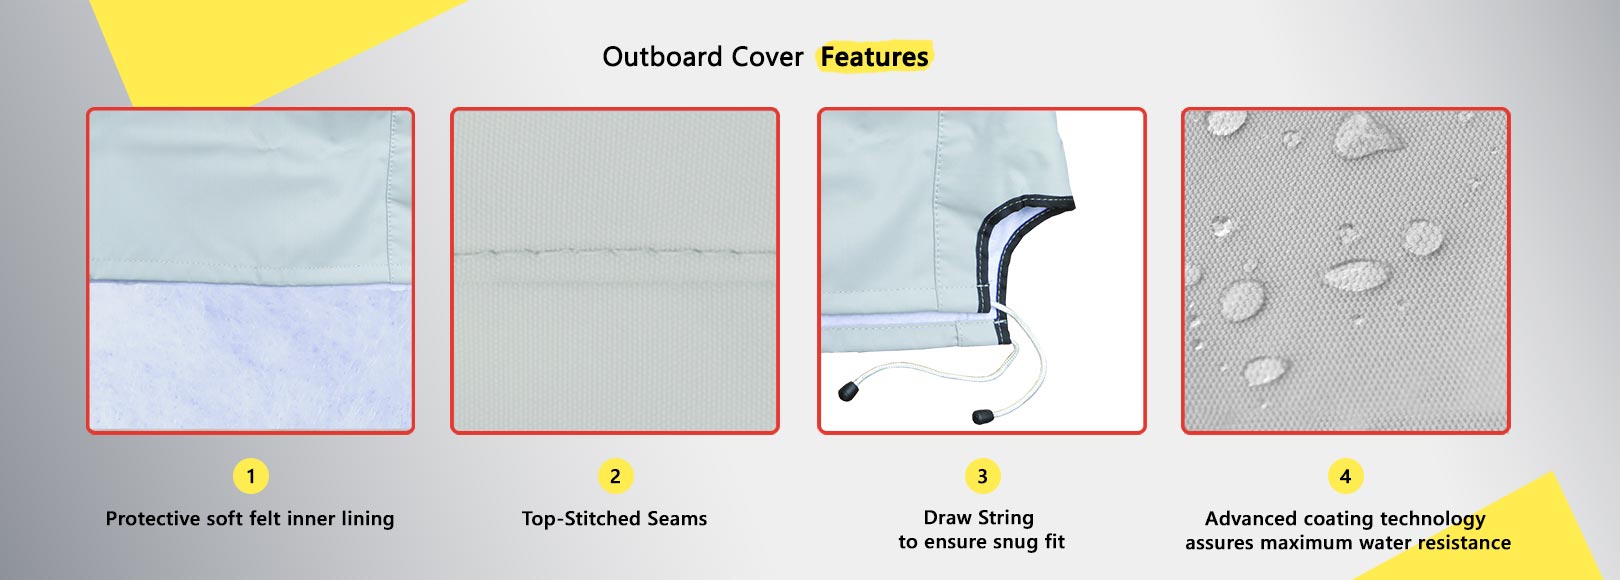 Universal Cowling Covers Features